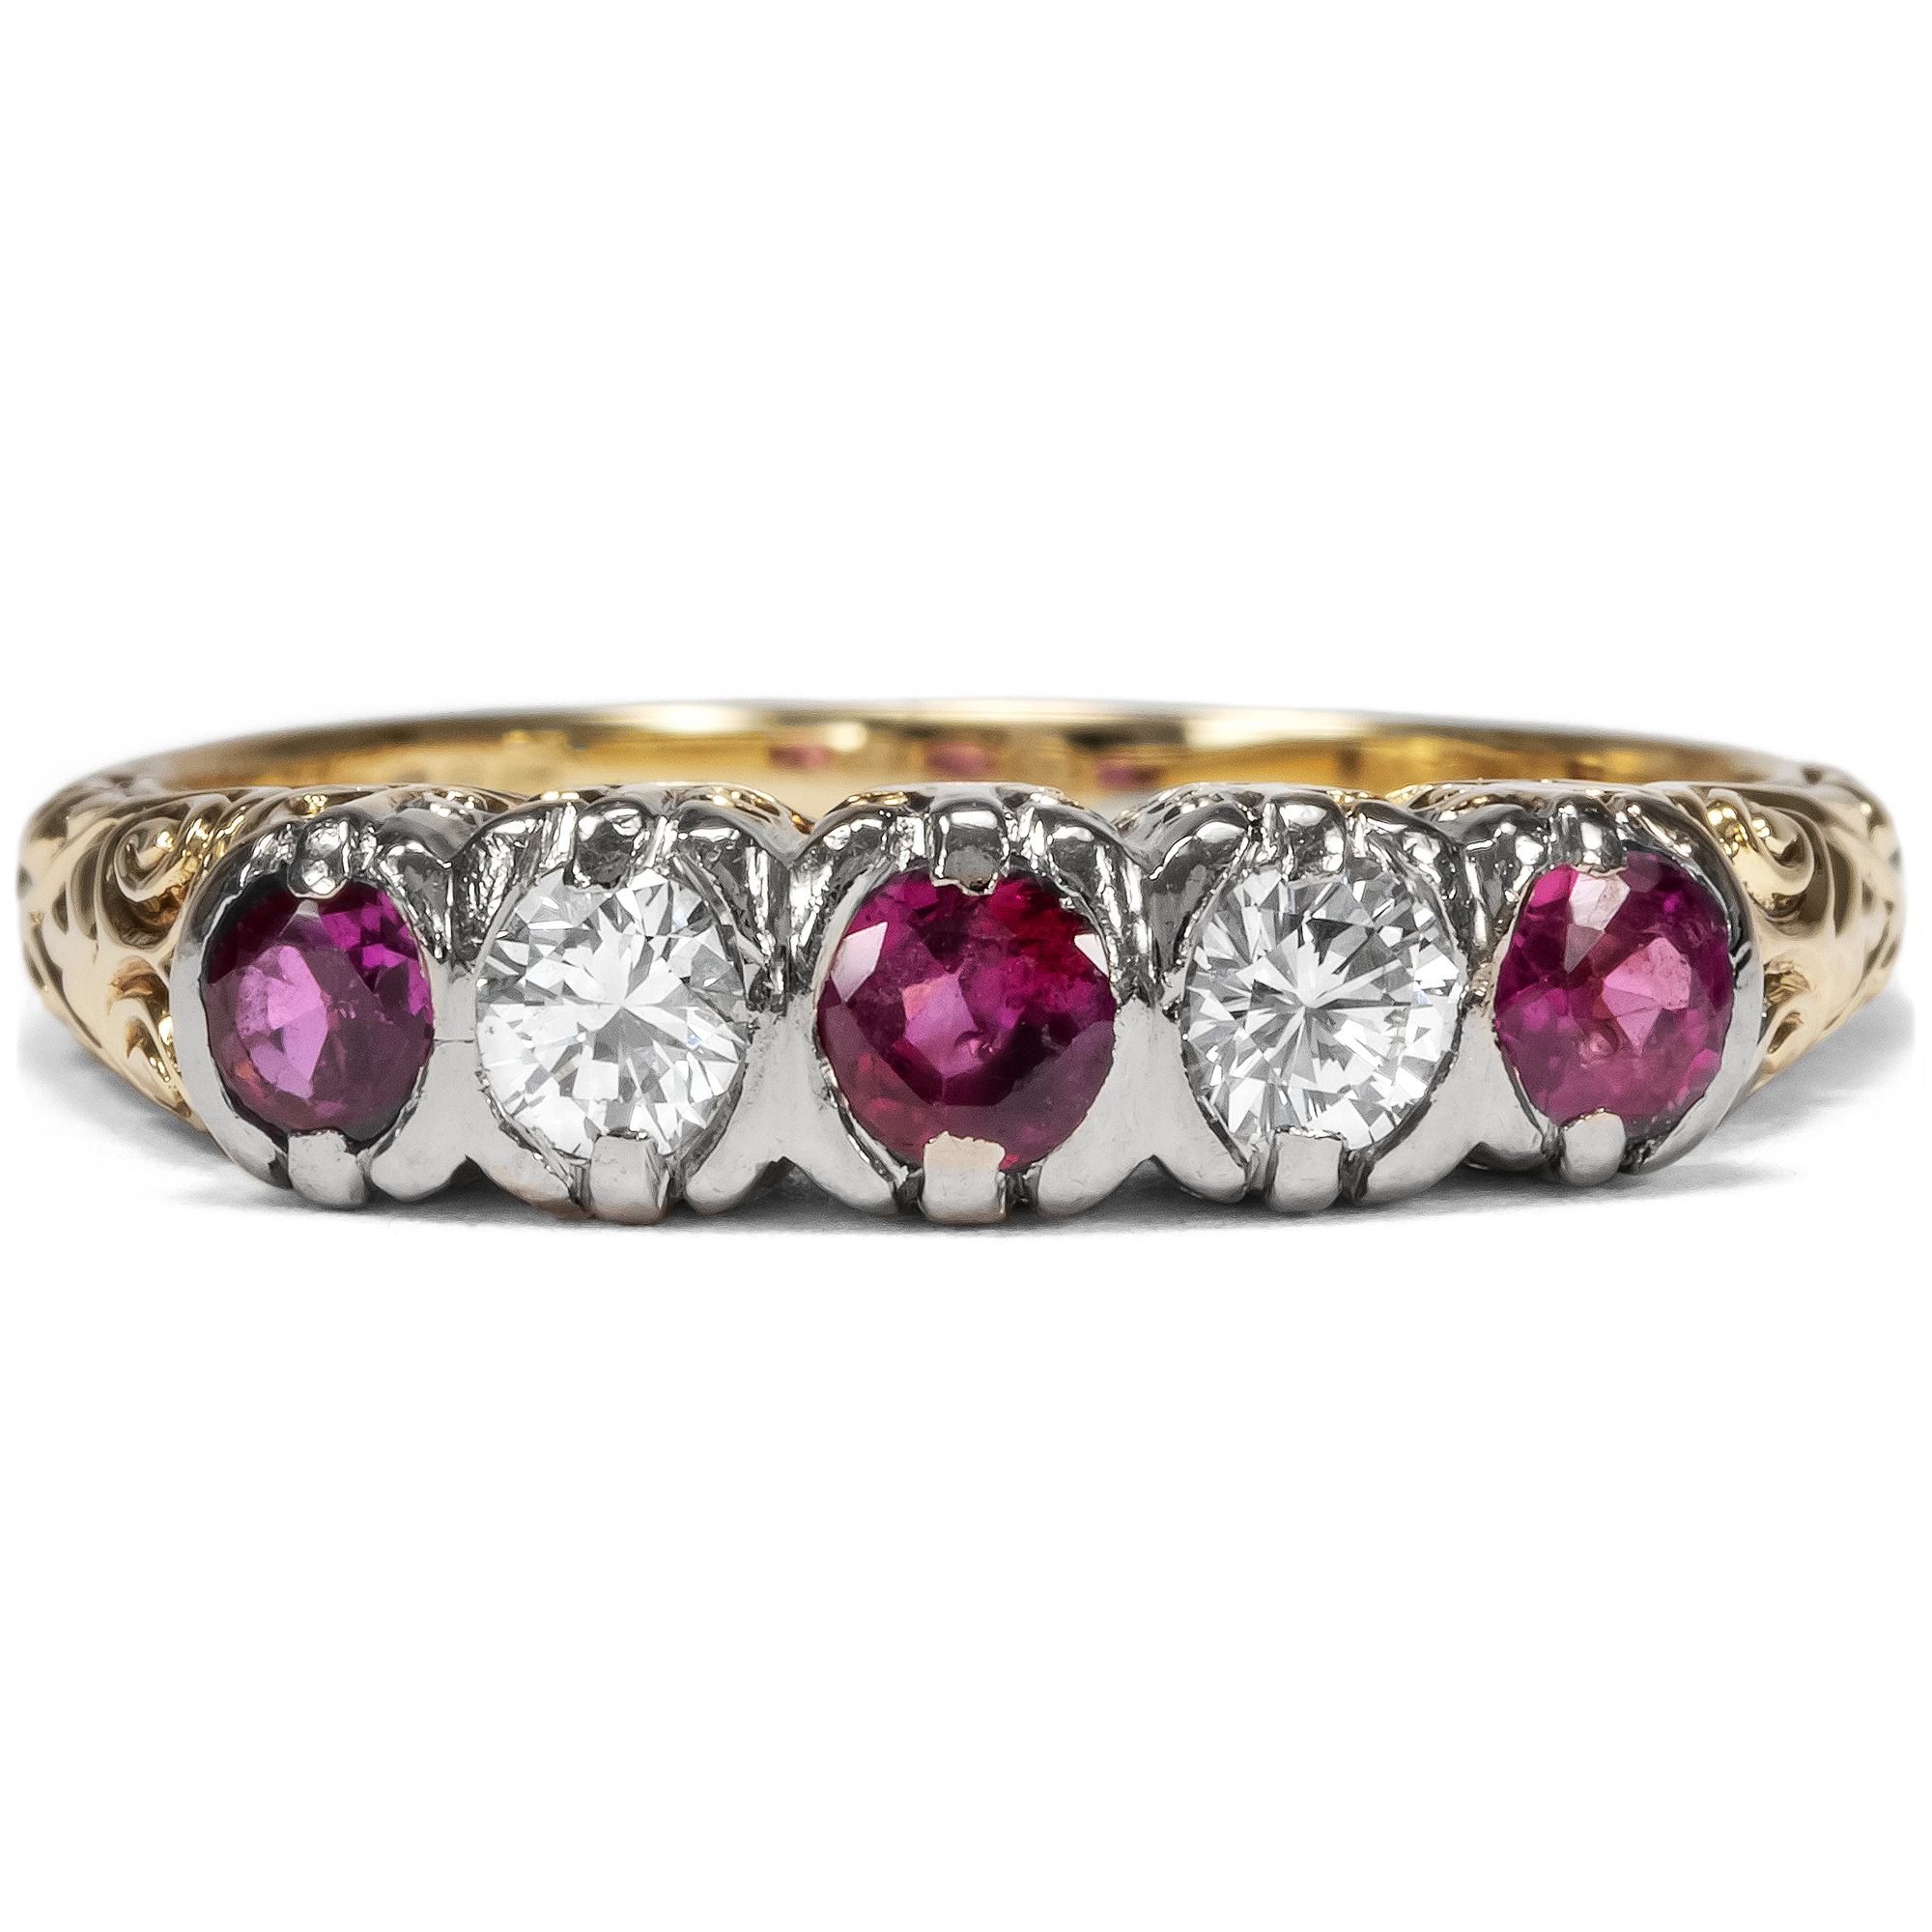 Vintage Ring with Burmese Rubies & Diamonds in Gold, c. 1980